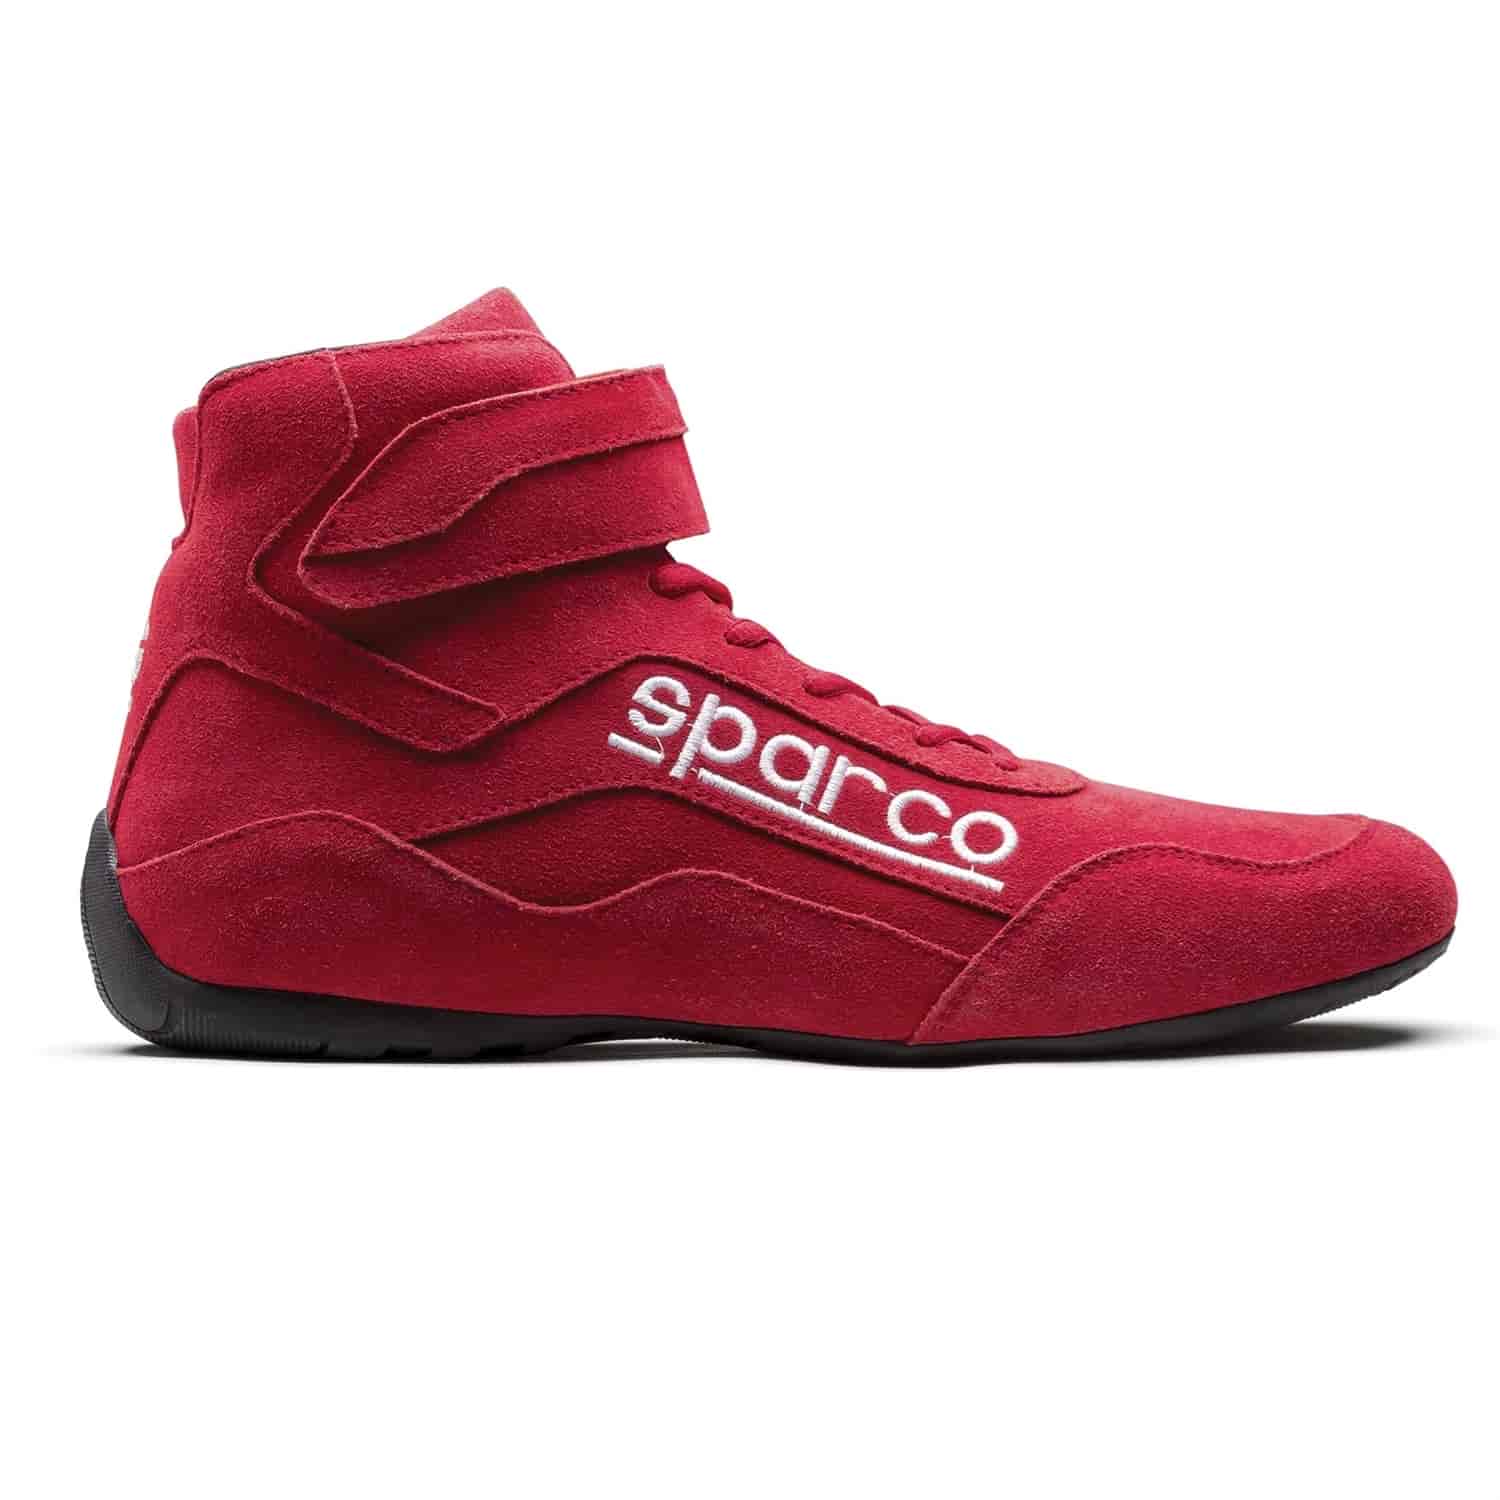 Race 2 Shoe Size 12 - Red